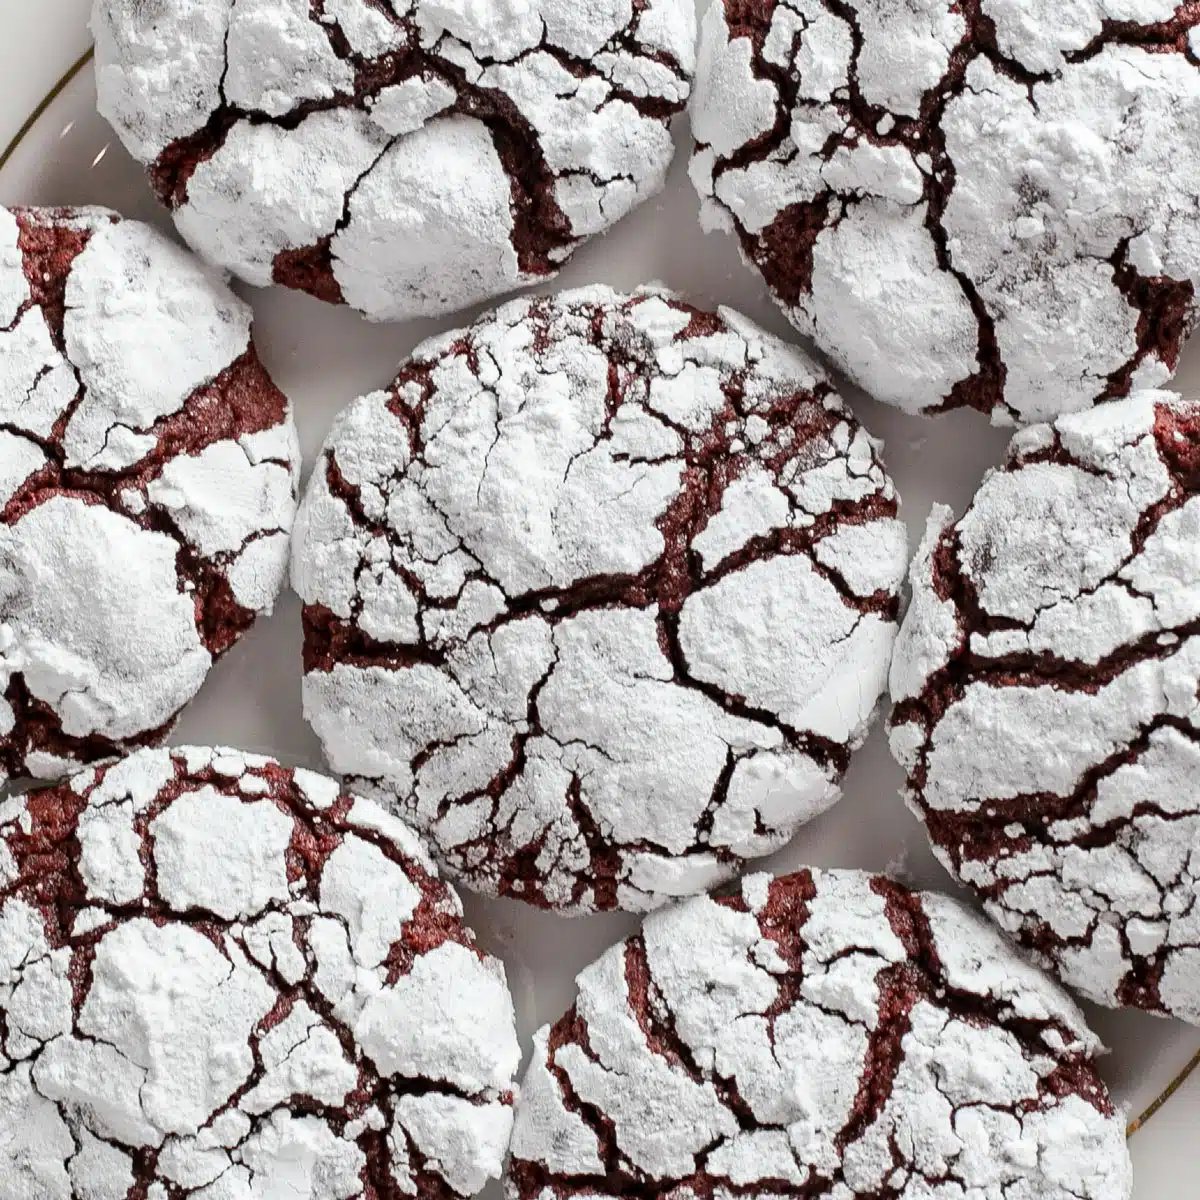 Best red velvet crinkle cookies recipe with deliciously tender crackled cookies on plate.